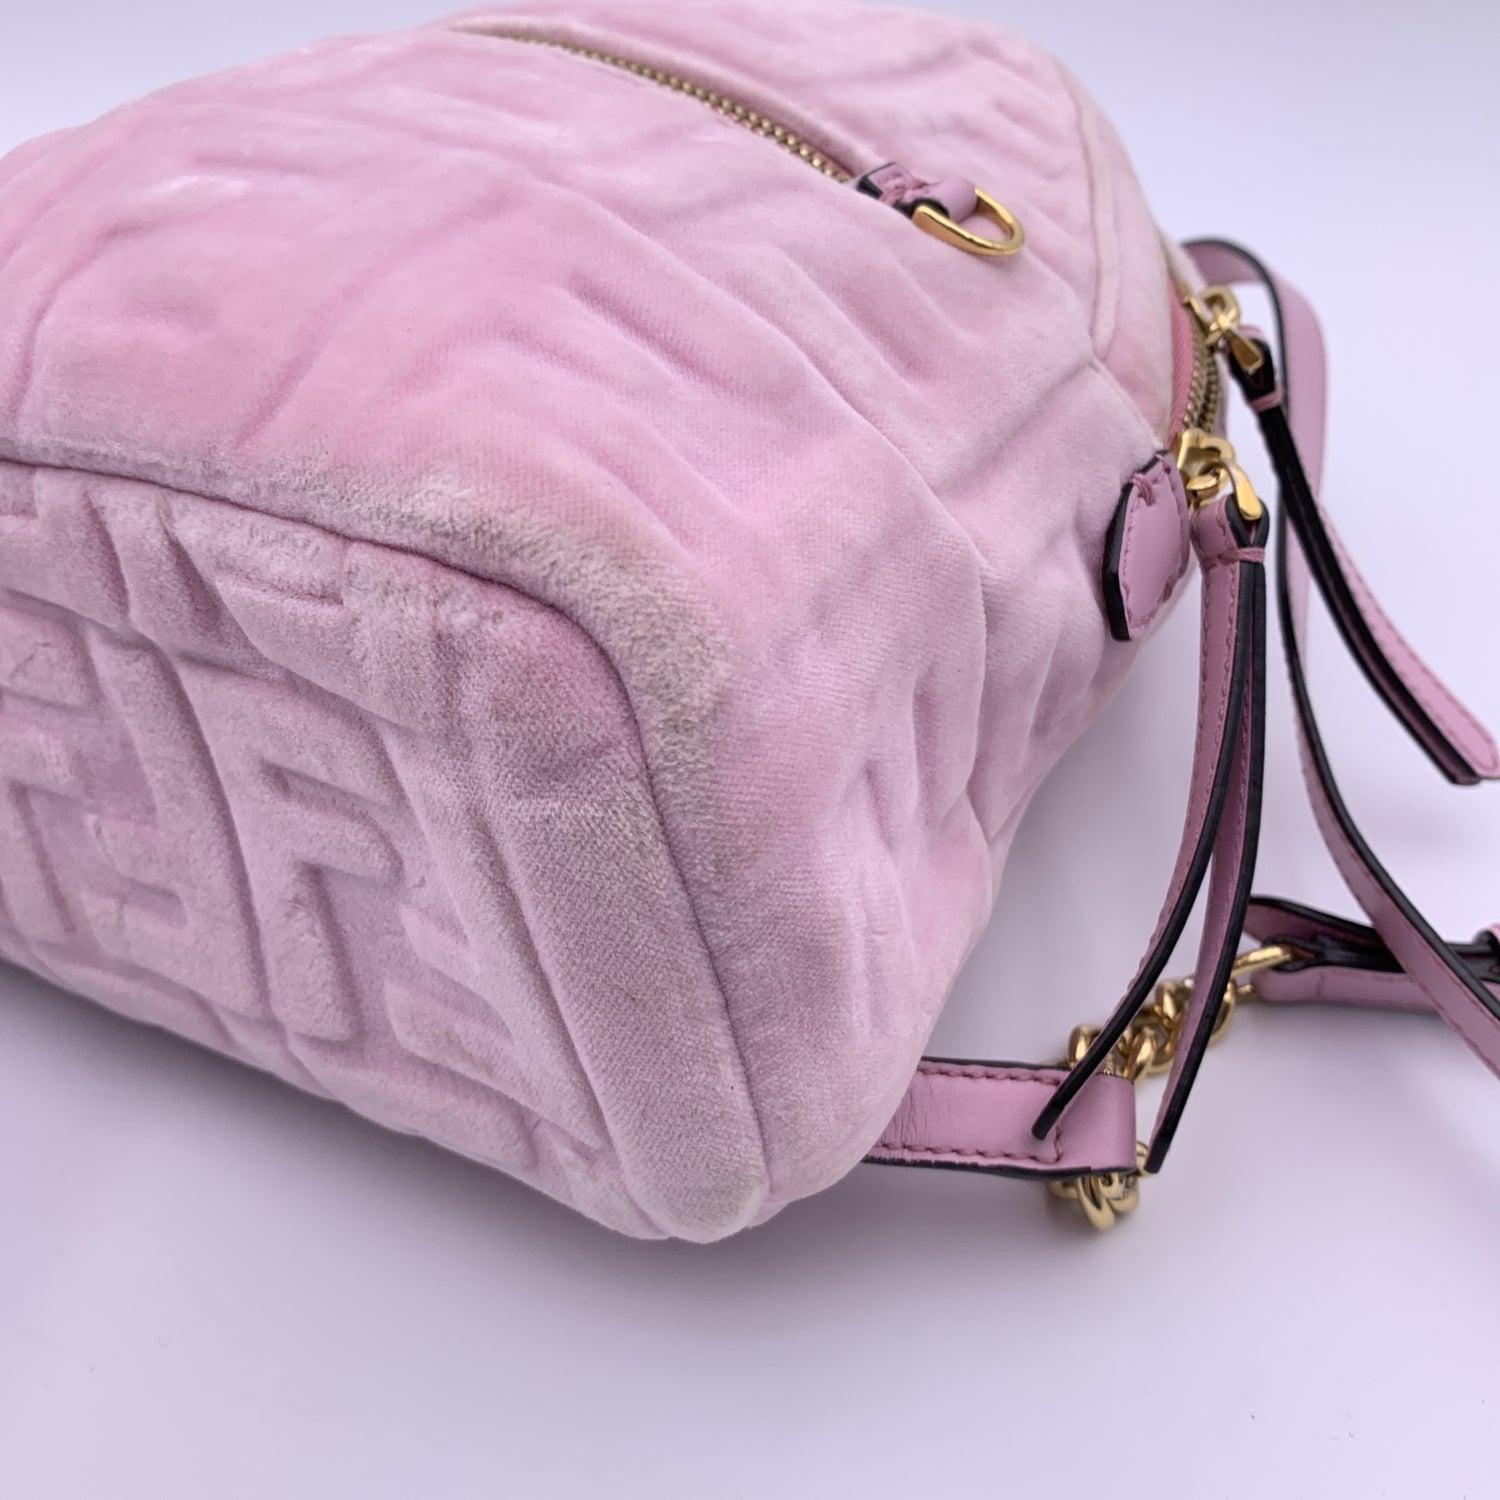 This beautiful Bag will come with a Certificate of Authenticity provided by Entrupy. The certificate will be provided at no further cost Gorgeous FENDI mini backpack carfted in pink velvet with embossed FF monogram pattern. Leather handles and